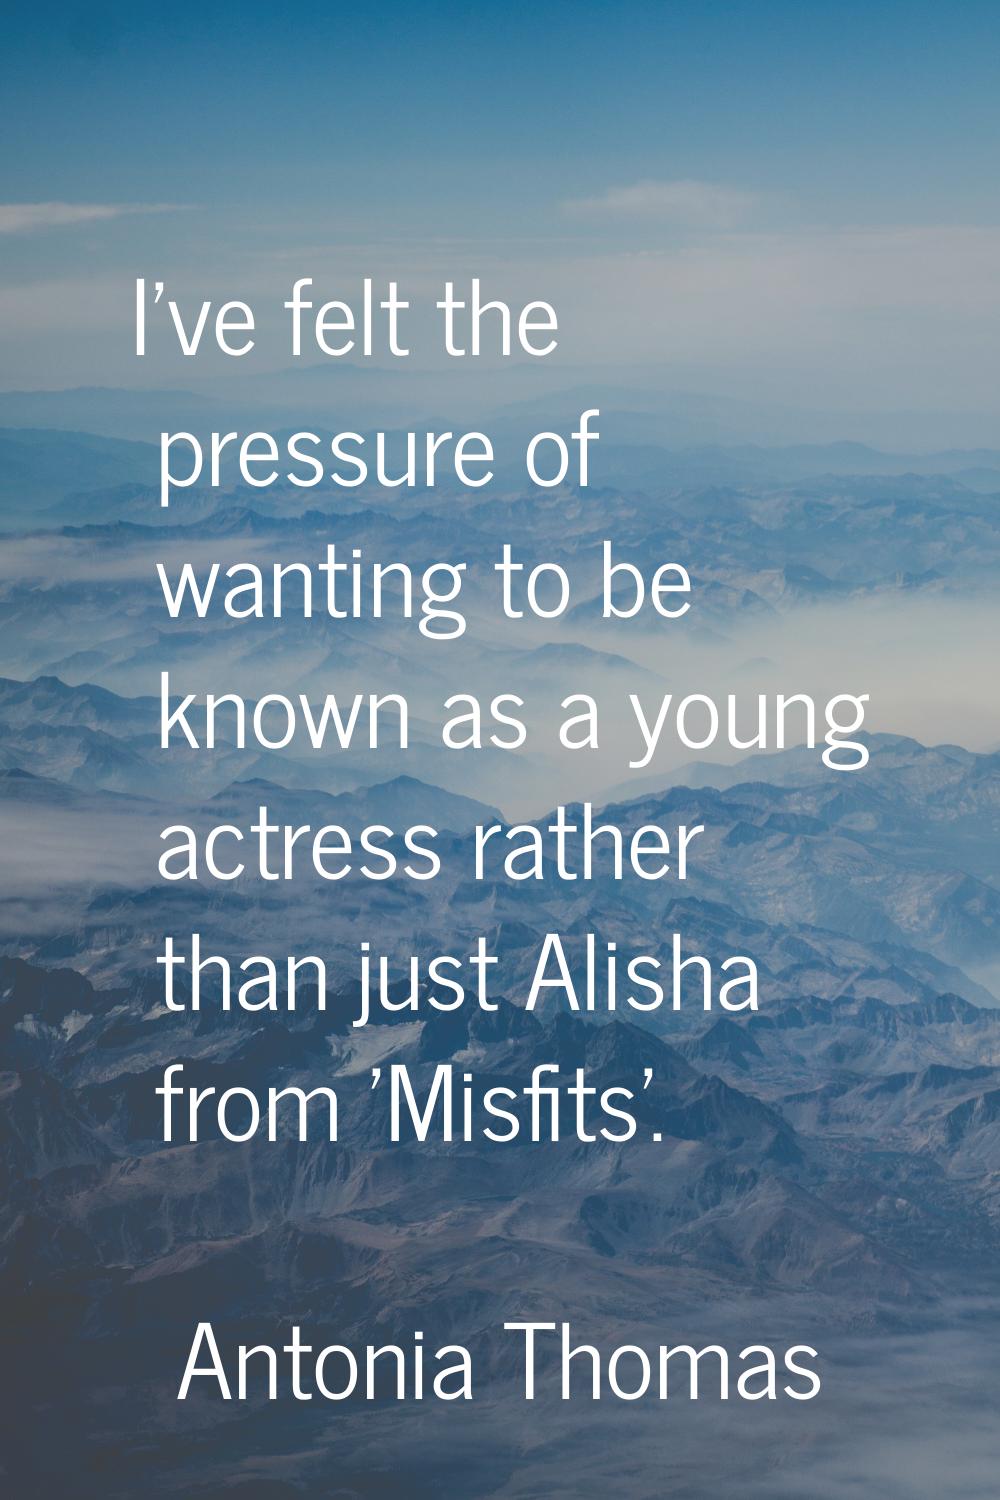 I've felt the pressure of wanting to be known as a young actress rather than just Alisha from 'Misf